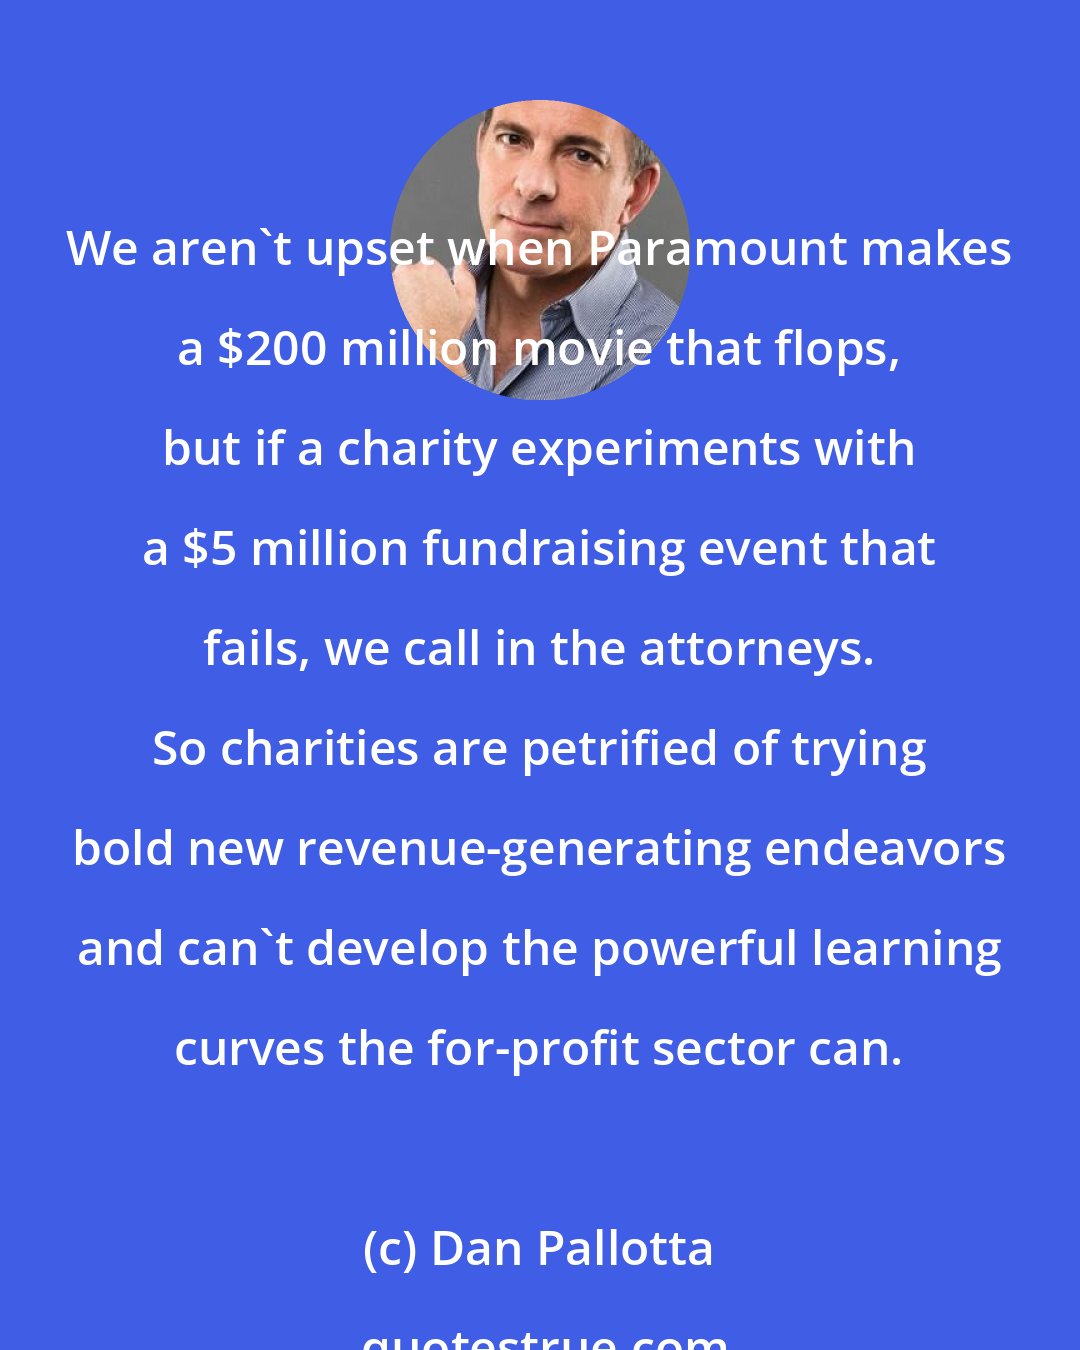 Dan Pallotta: We aren't upset when Paramount makes a $200 million movie that flops, but if a charity experiments with a $5 million fundraising event that fails, we call in the attorneys. So charities are petrified of trying bold new revenue-generating endeavors and can't develop the powerful learning curves the for-profit sector can.